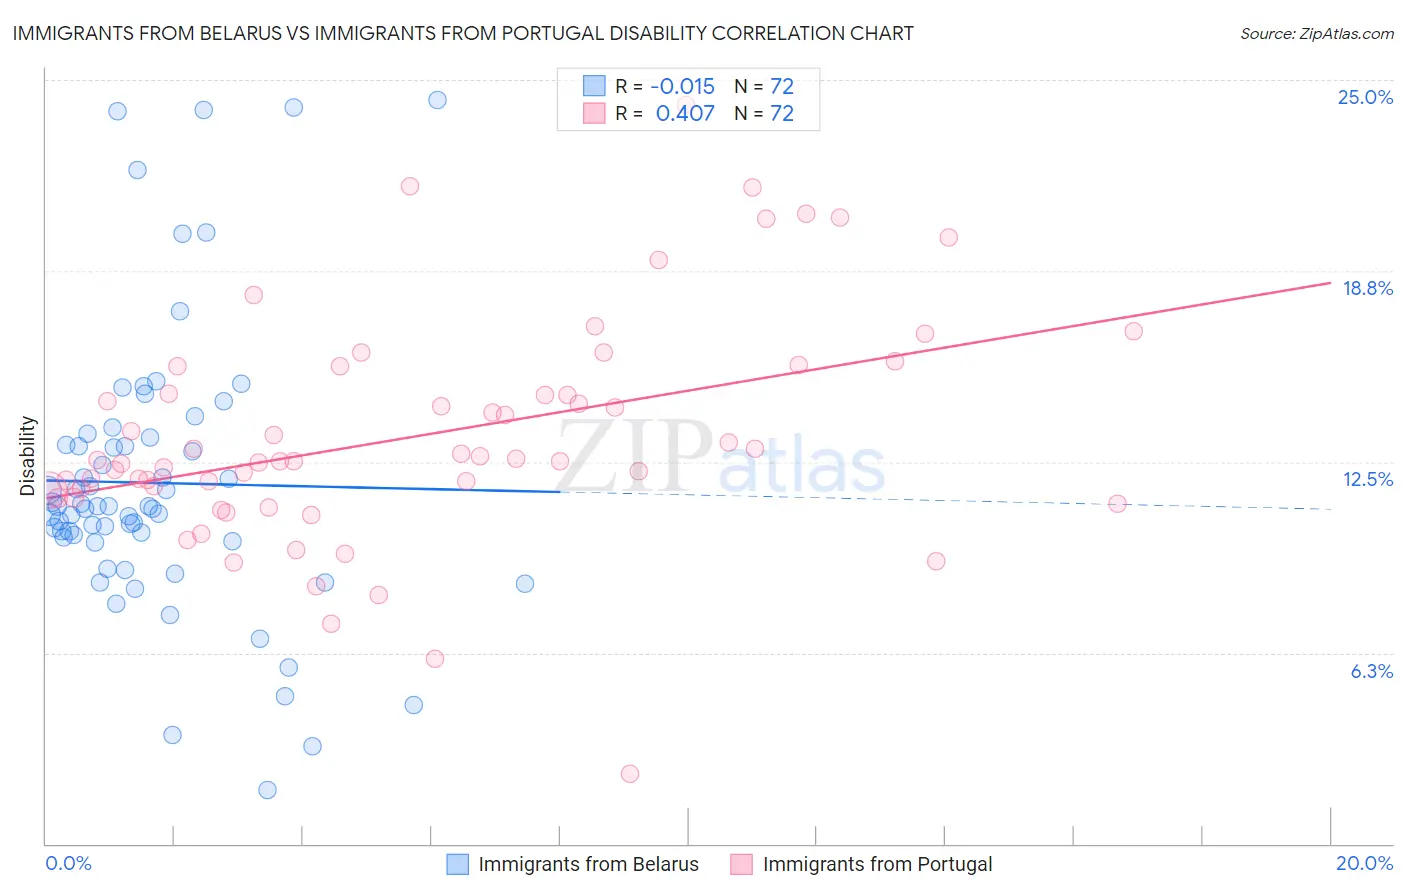 Immigrants from Belarus vs Immigrants from Portugal Disability